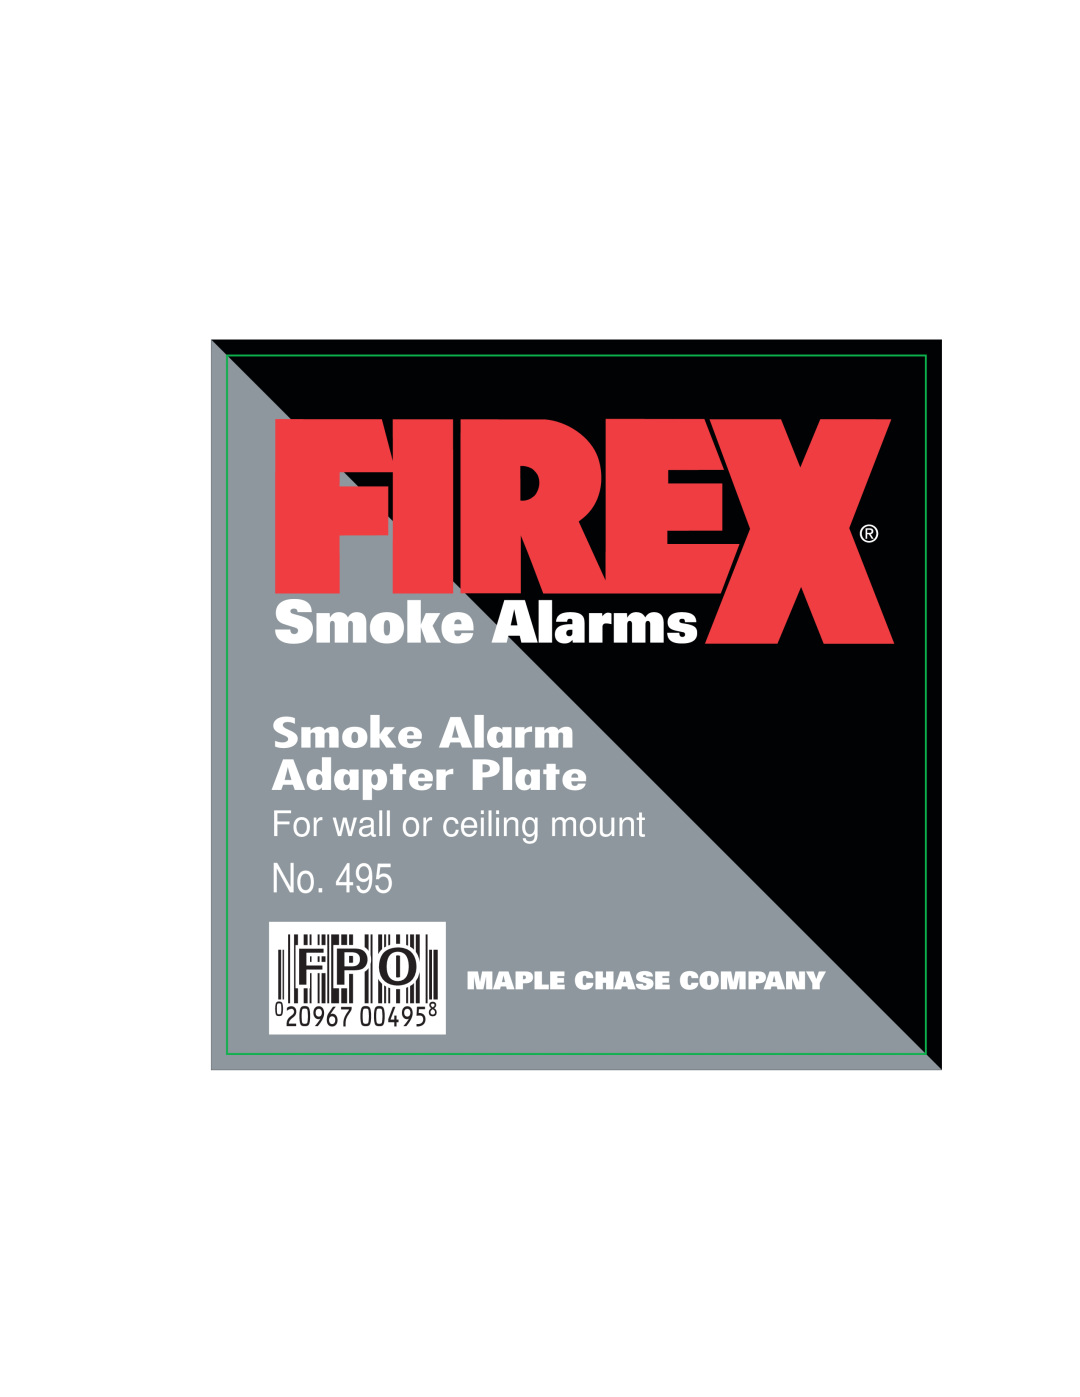 Firex manual Smoke Alarms, Adapter Plate, For wall or ceiling mount, 020967 00495, Maple Chase Company 